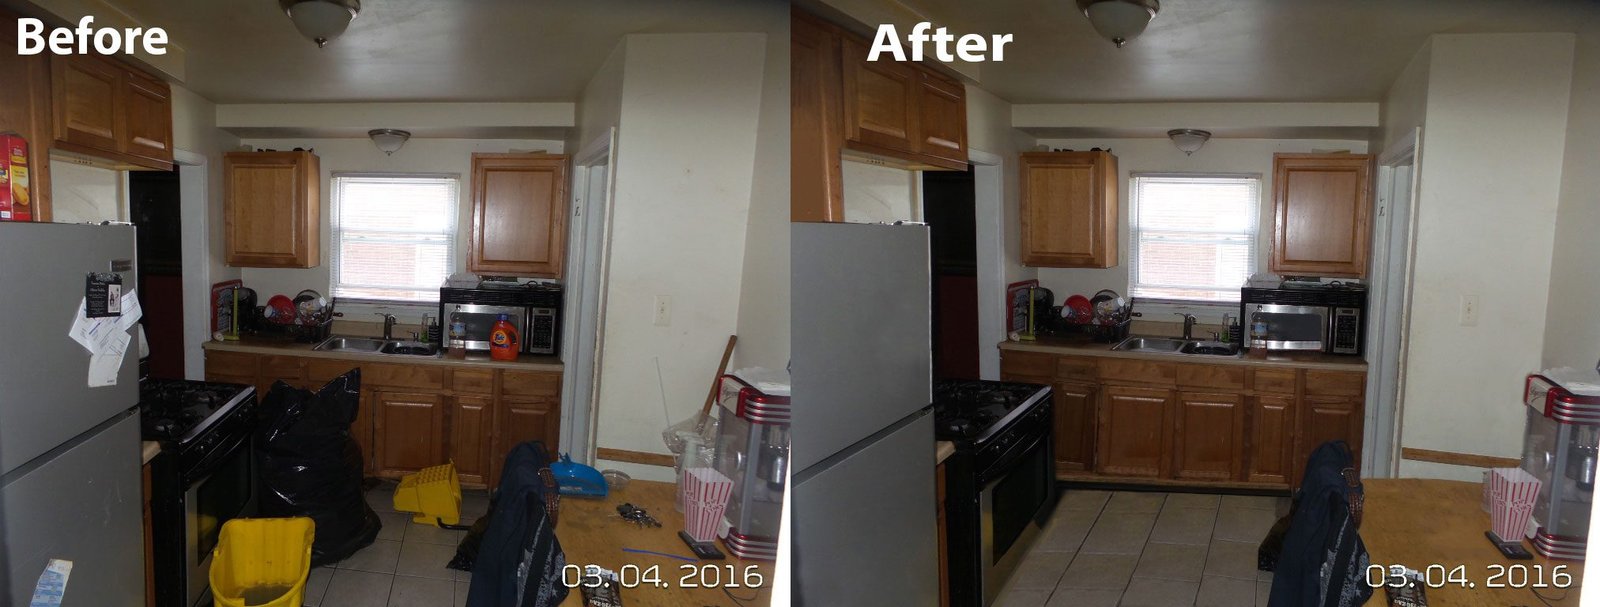 Unwanted Object Removal - Real Estate Photo Editing